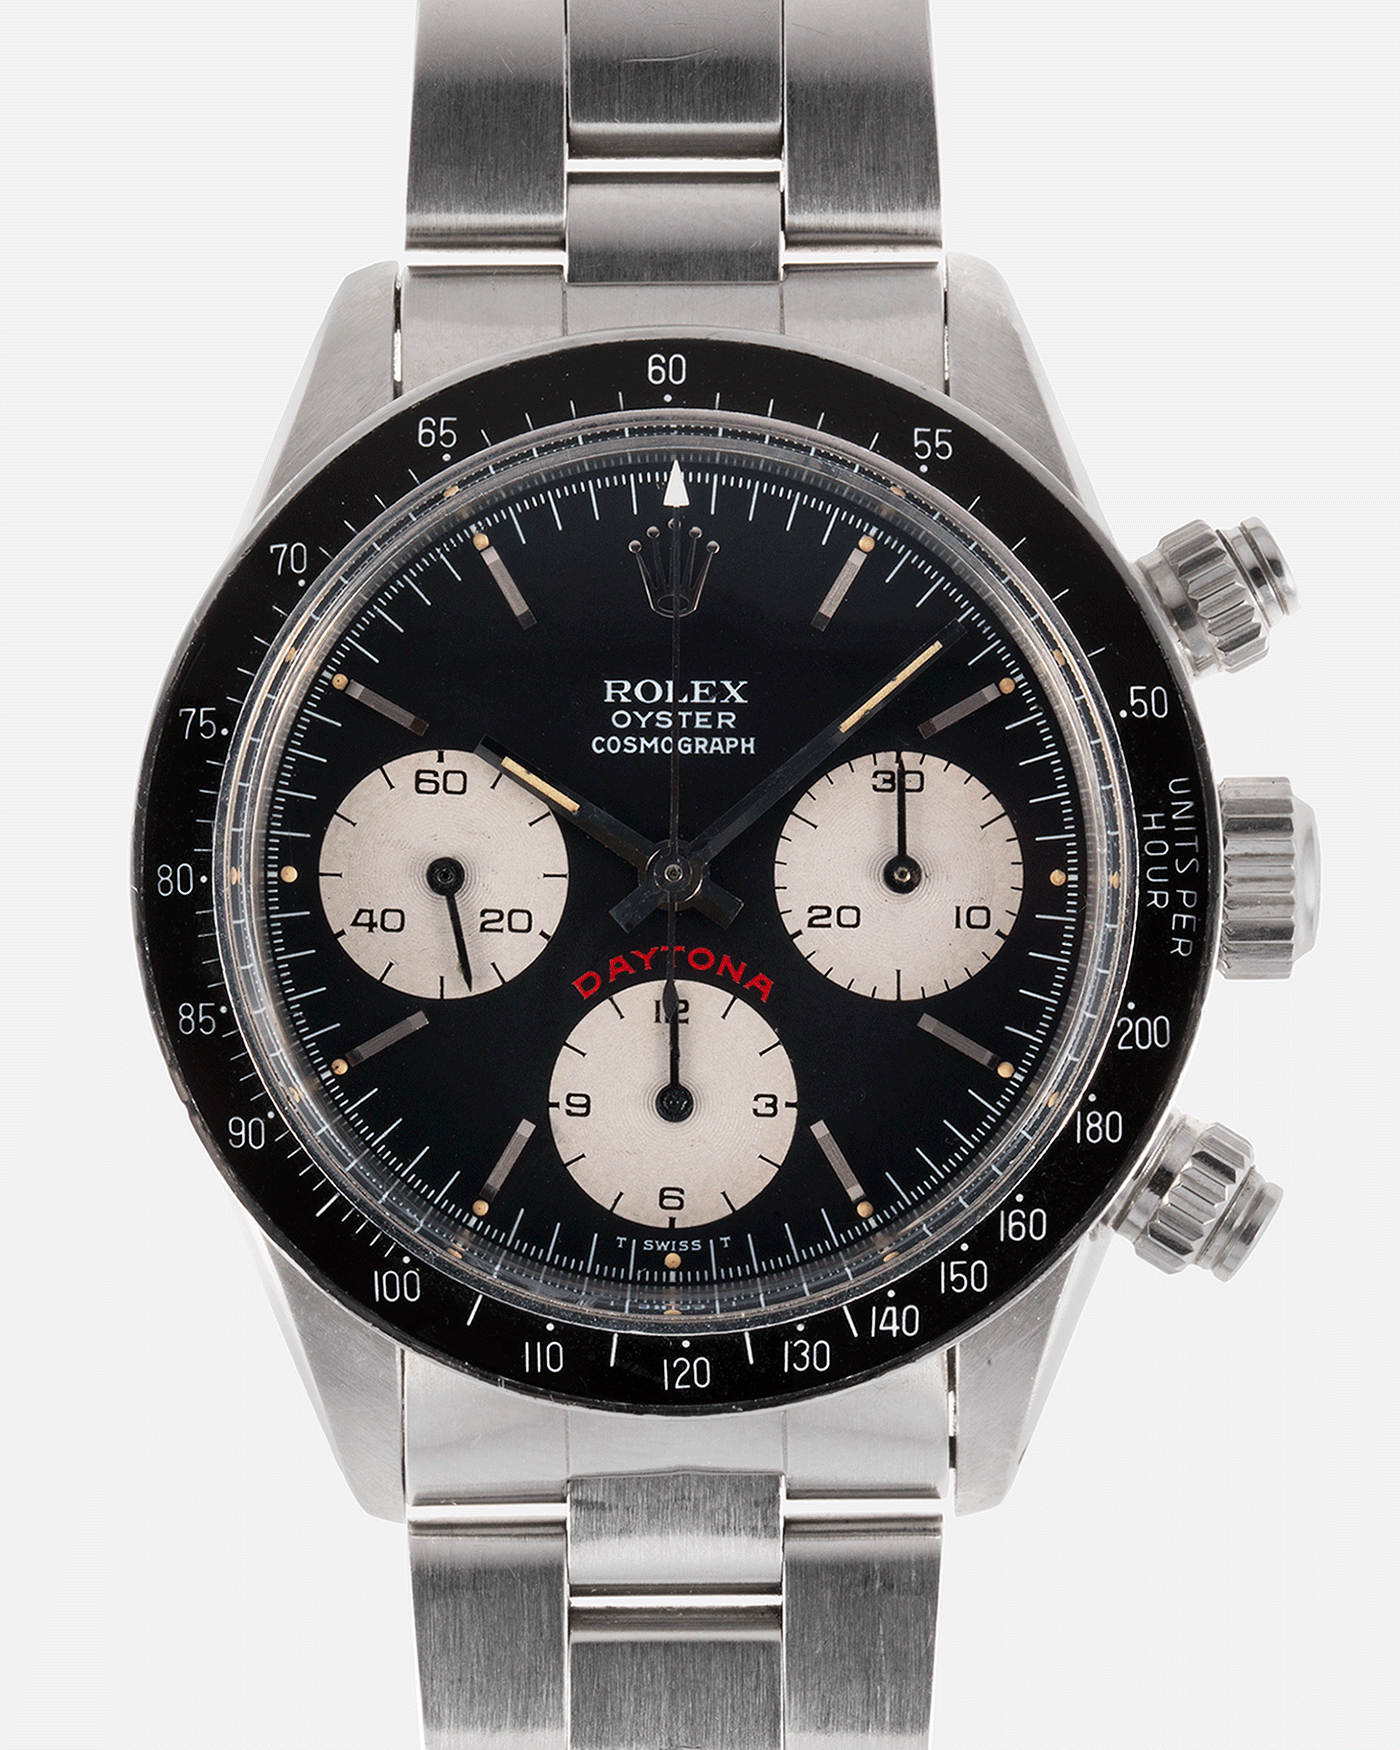 Rolex Cosmograph Daytona 6265 Chronograph Watch | S.Song Vintage Timepieces S.Song